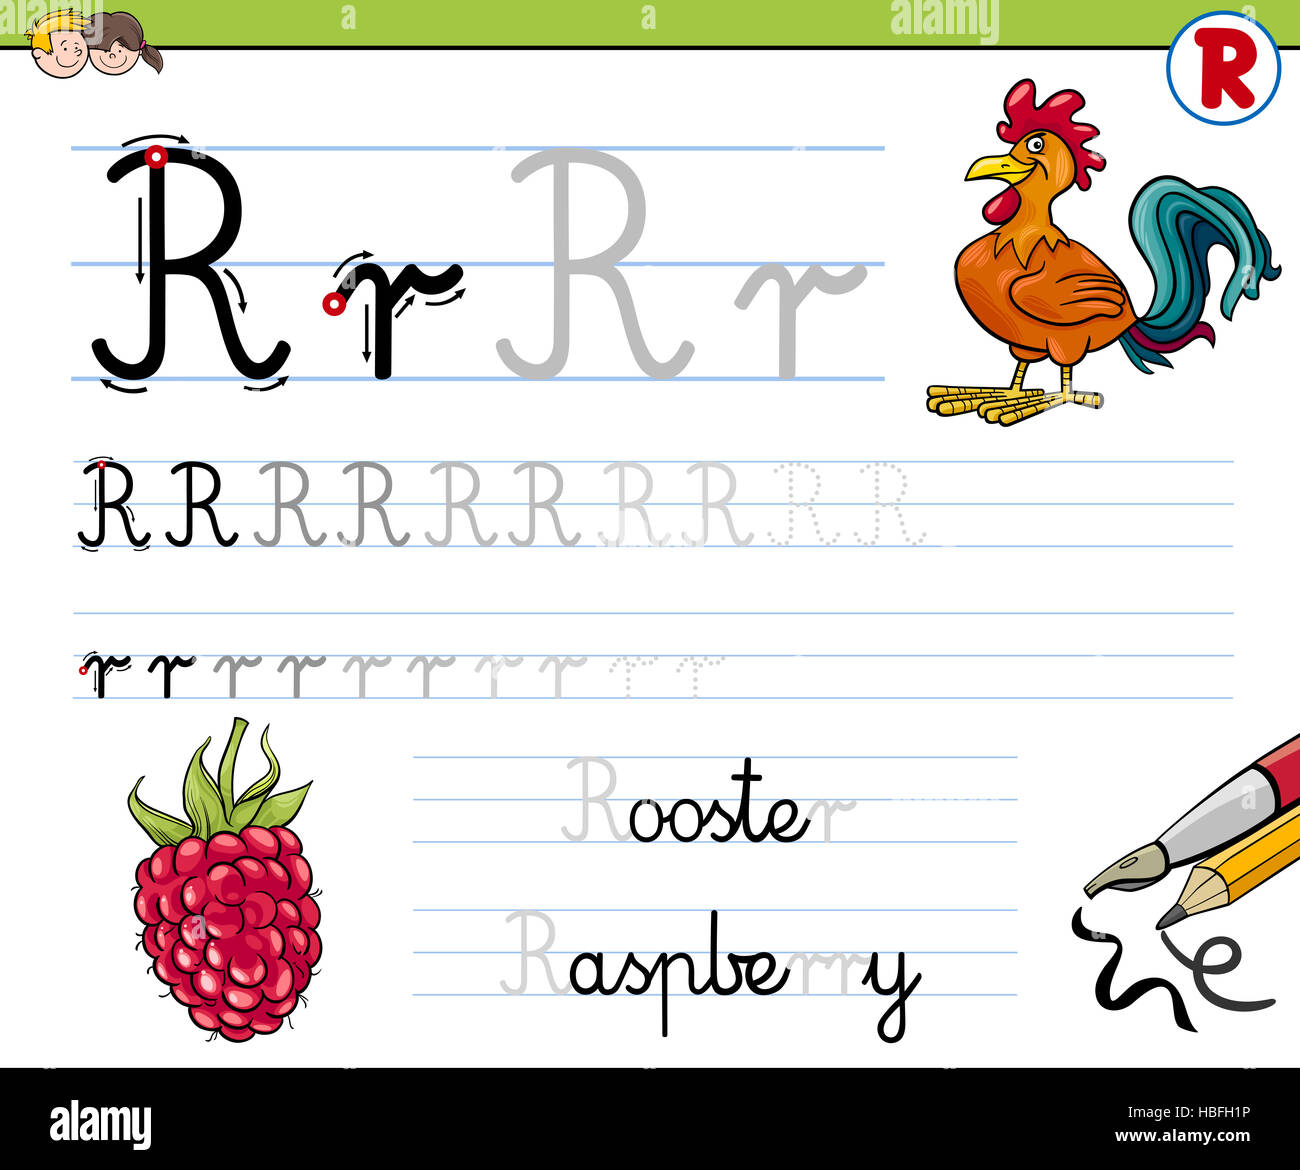 how to write letter r Stock Photo - Alamy